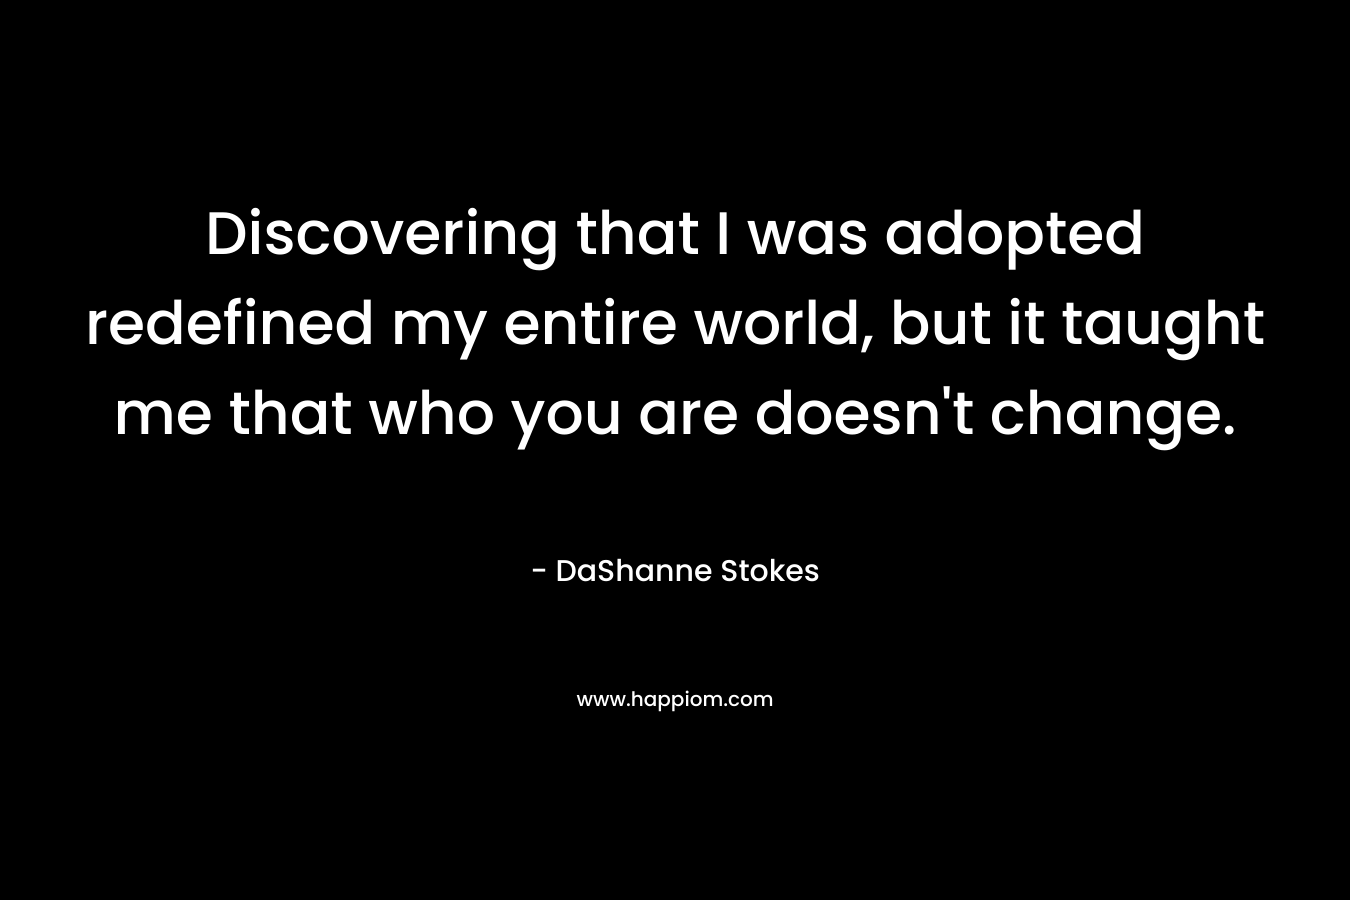 Discovering that I was adopted redefined my entire world, but it taught me that who you are doesn't change.